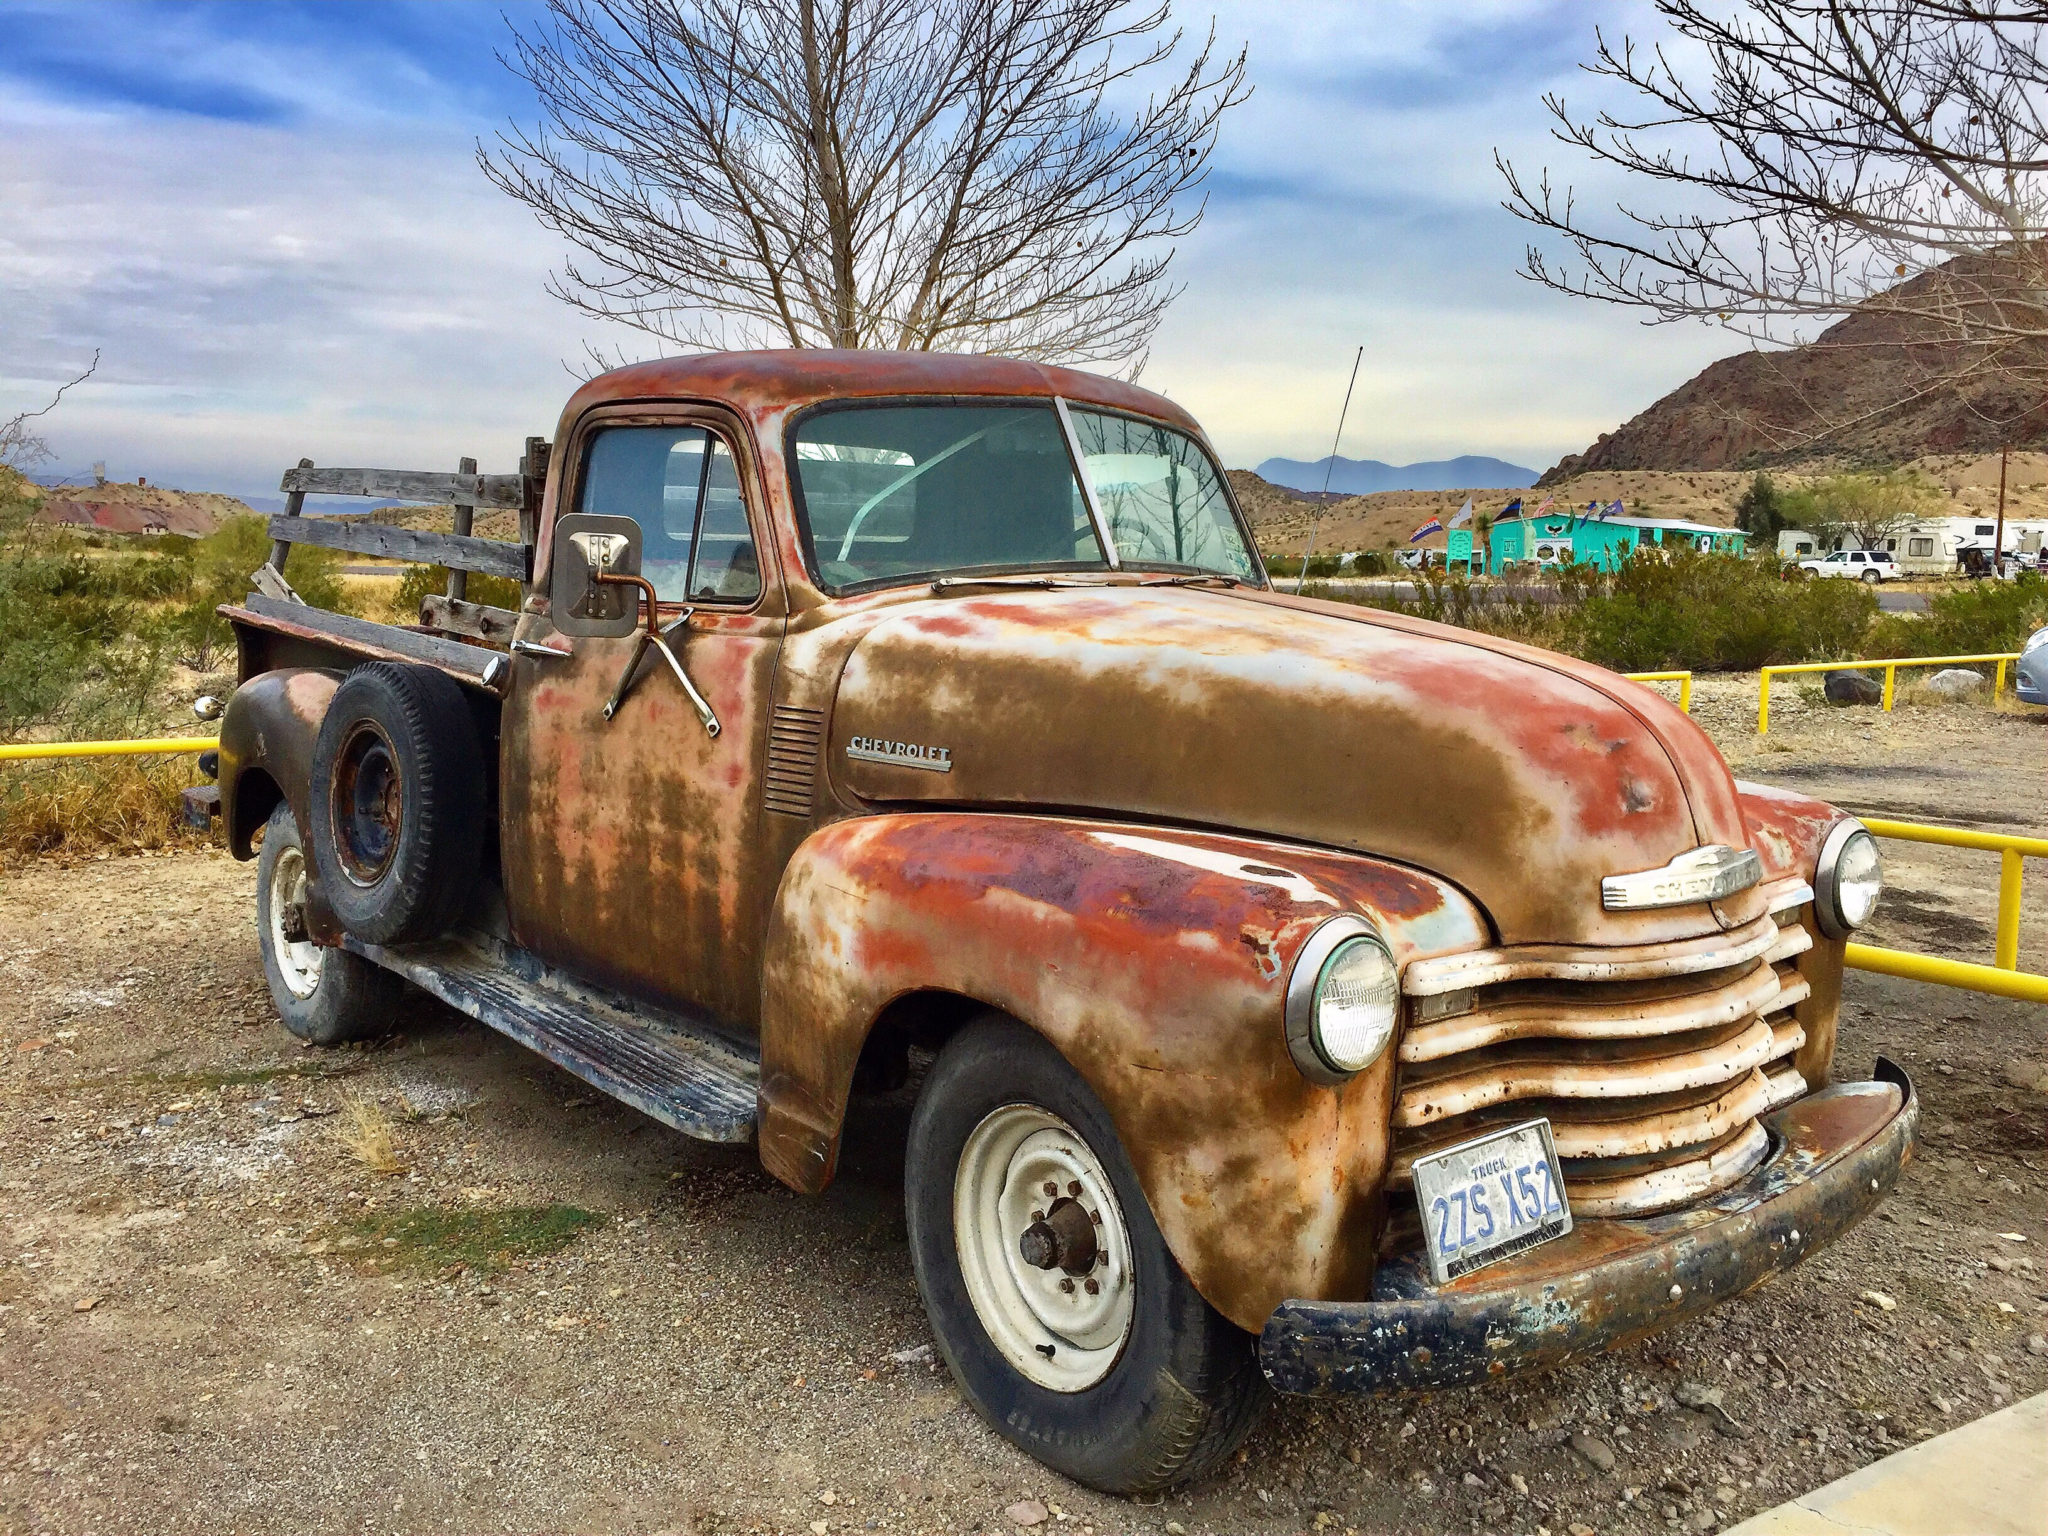 Old and rusty Chevrolet truck